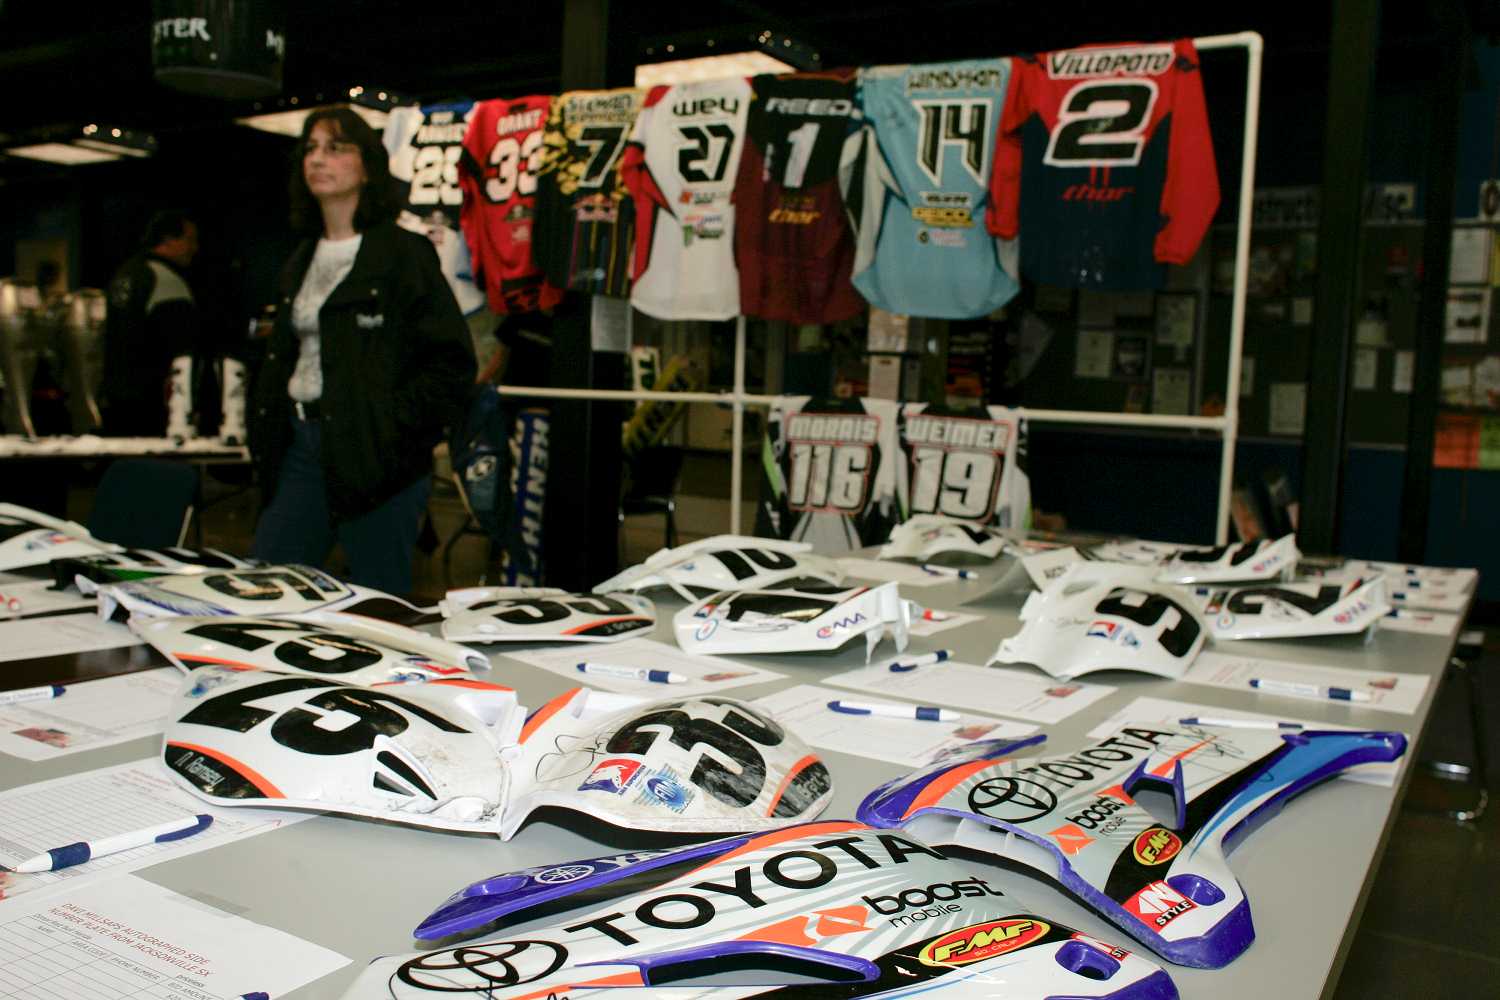 mx4c-09-seattle-silent-auction-jerseys-and-plates